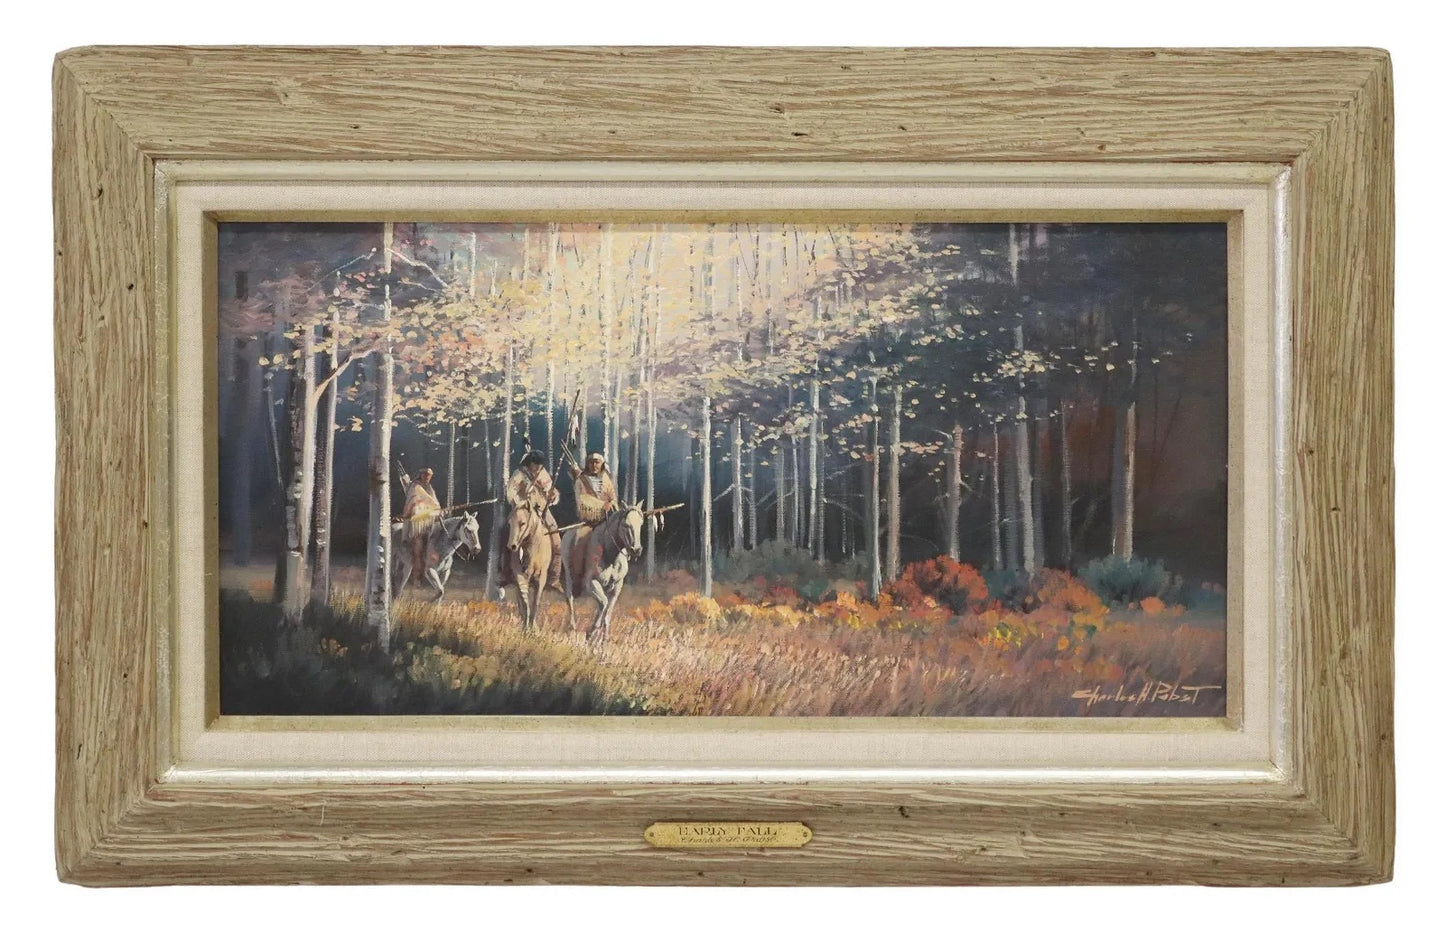 Charles H. Pabst - Early Fall 11.5” x 23.5"